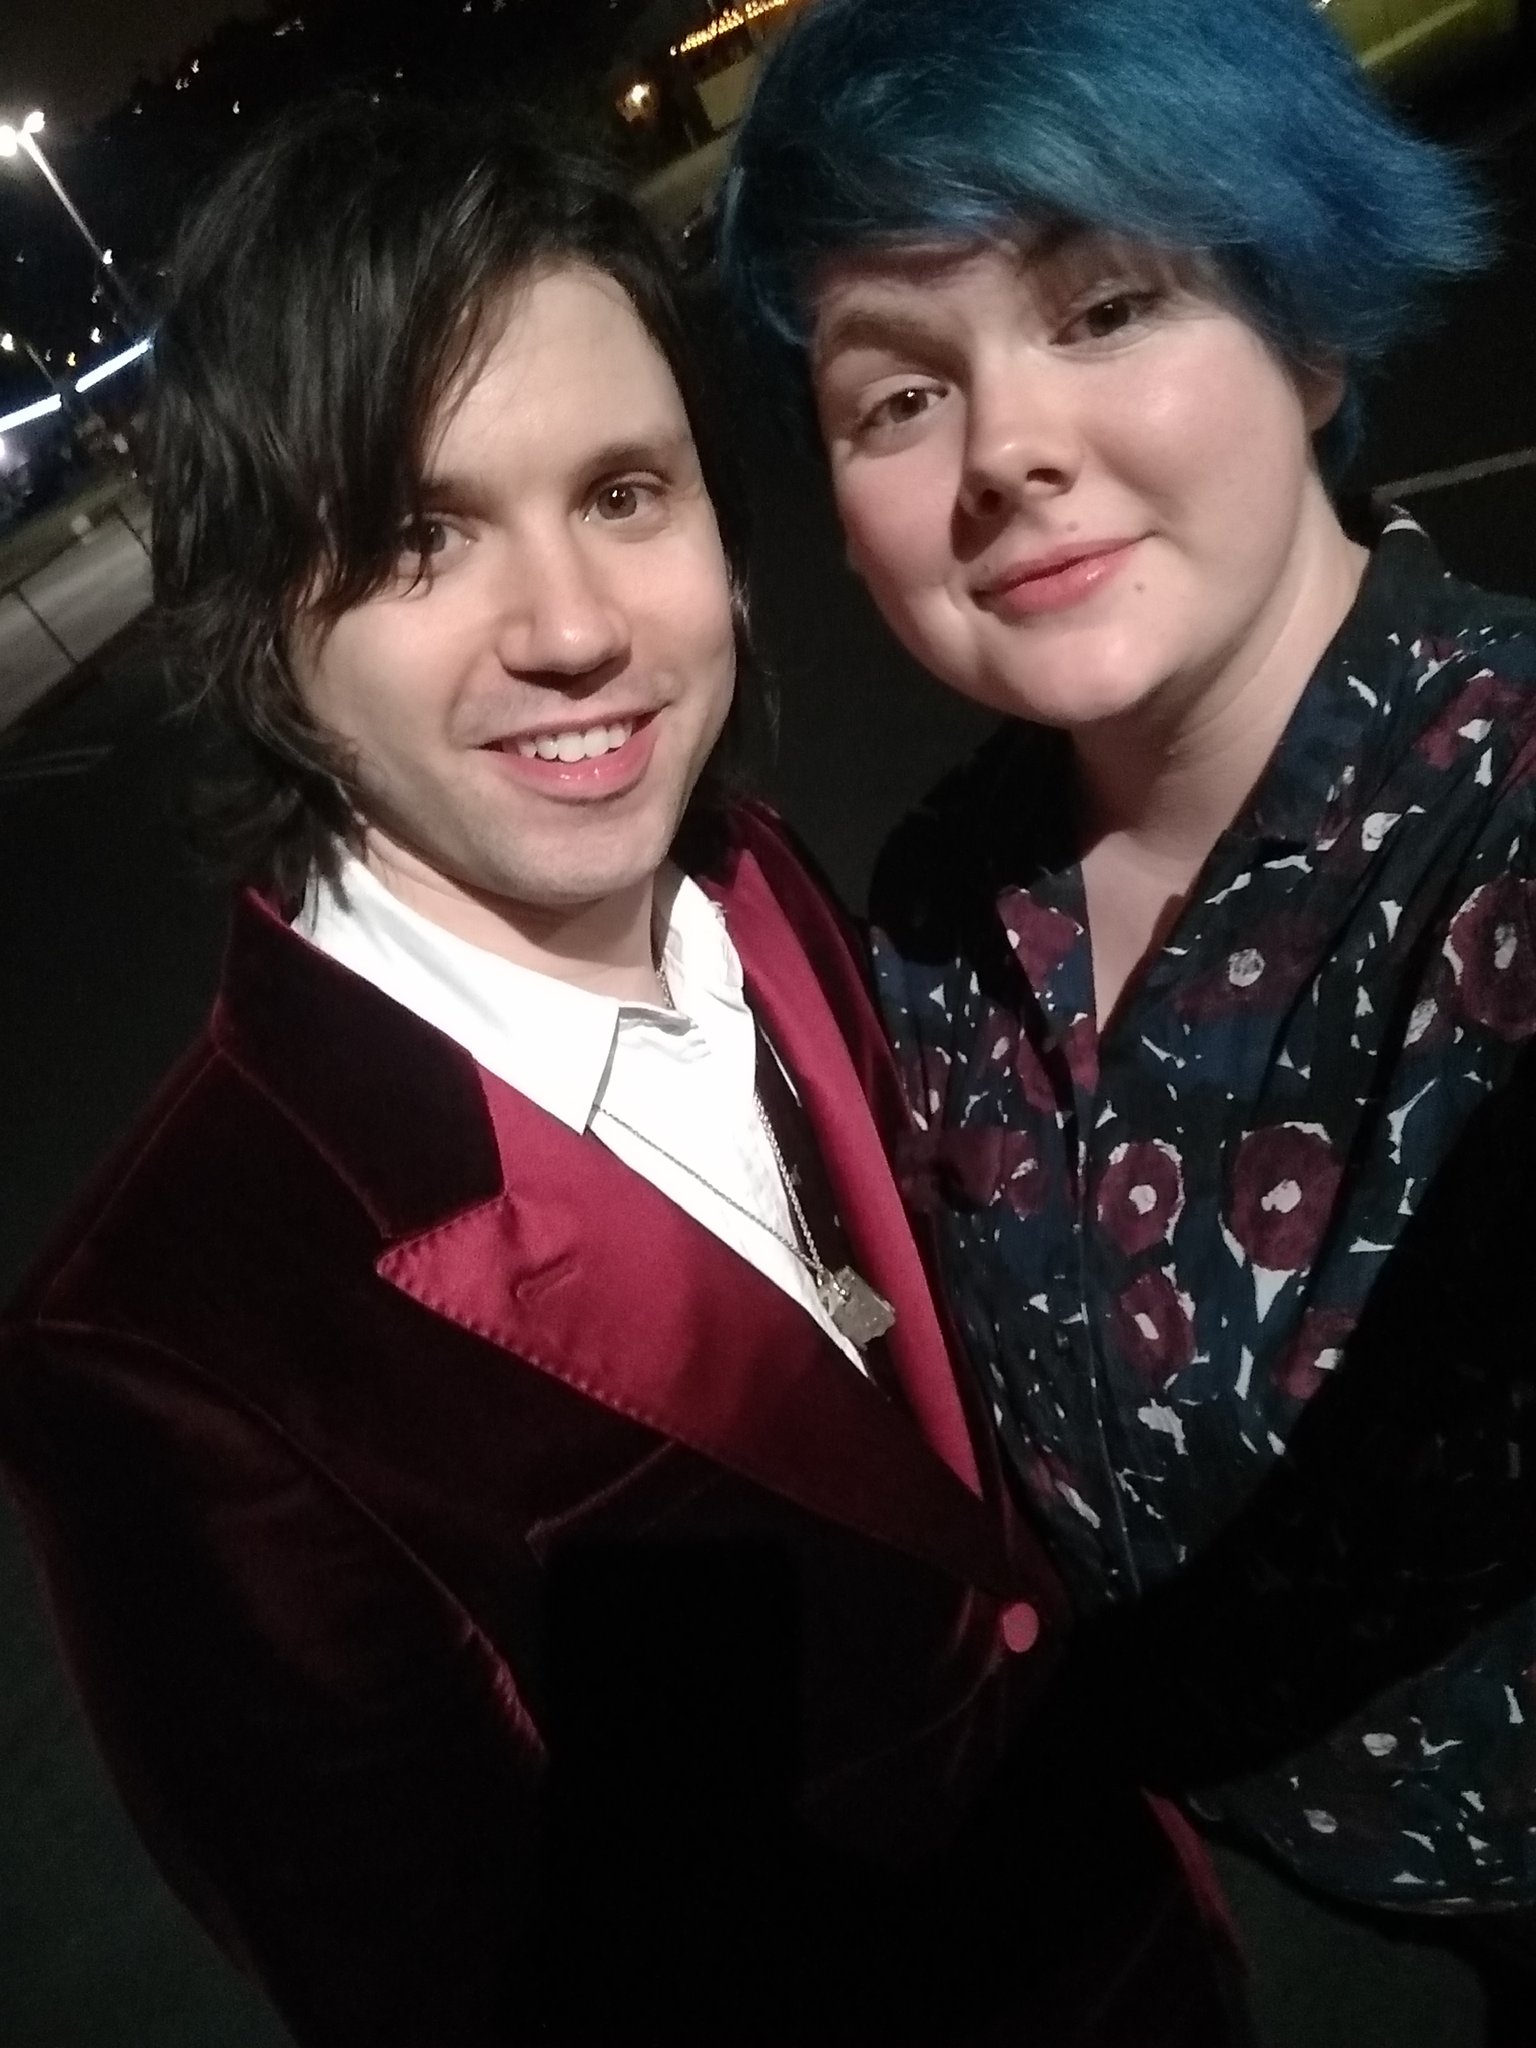 Happy birthday to my OG favorite human, the best member of US pop punk band Panic! At The Disco, Ryan Ross 